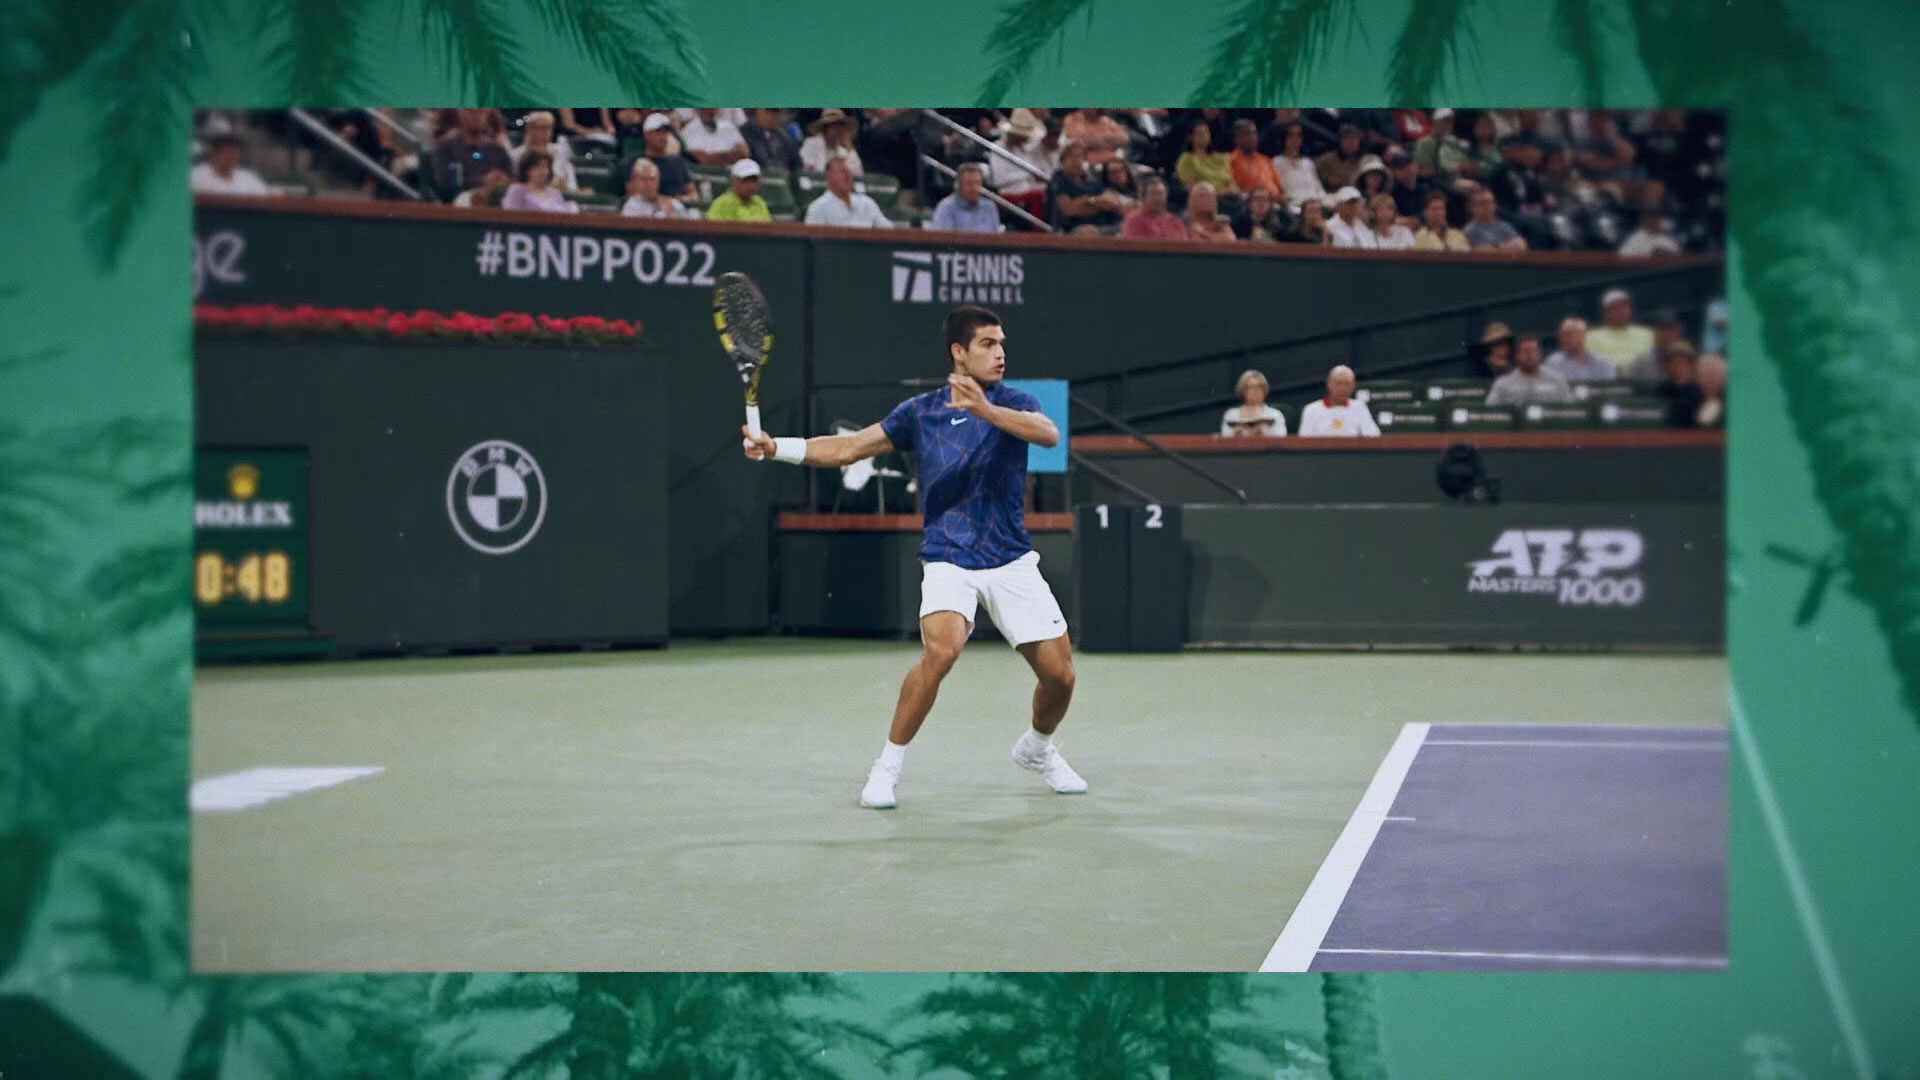 Stream the 2023 BNP Paribas Open live from Indian Wells, CA on Tennis Channel, now available on all Vidgo packages.